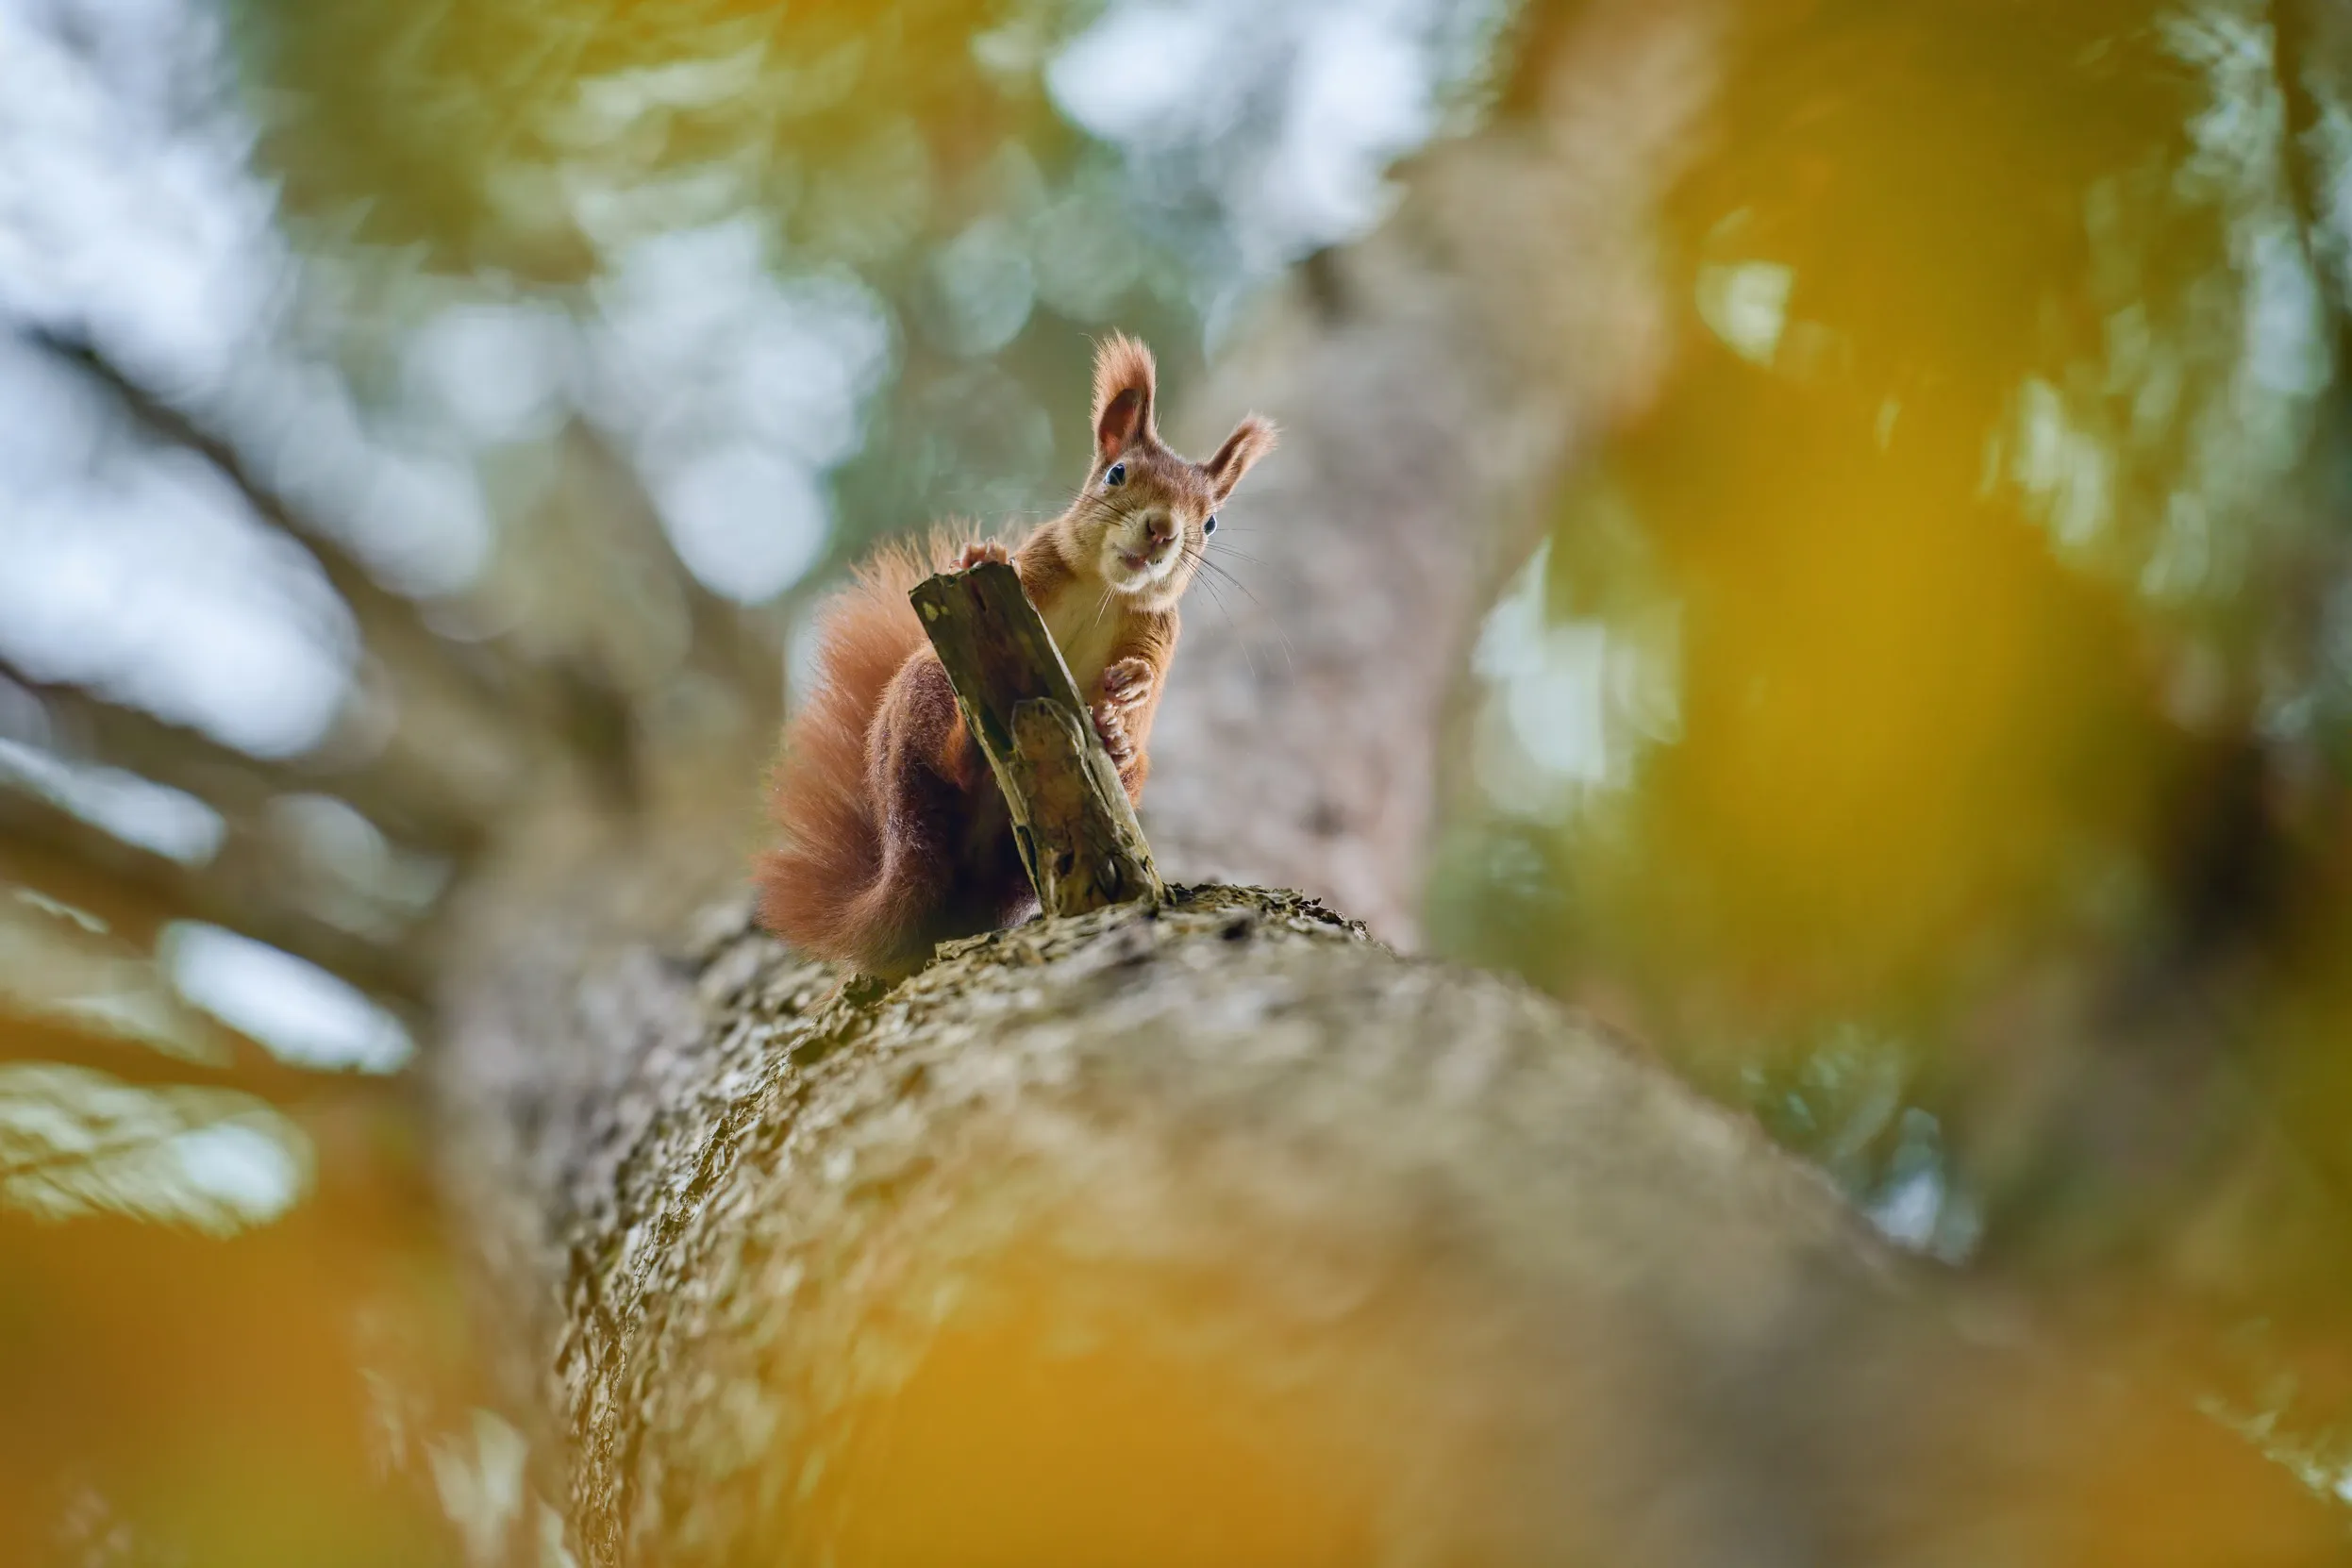 A Red Squirrel looking down a tree trunk towards the camera